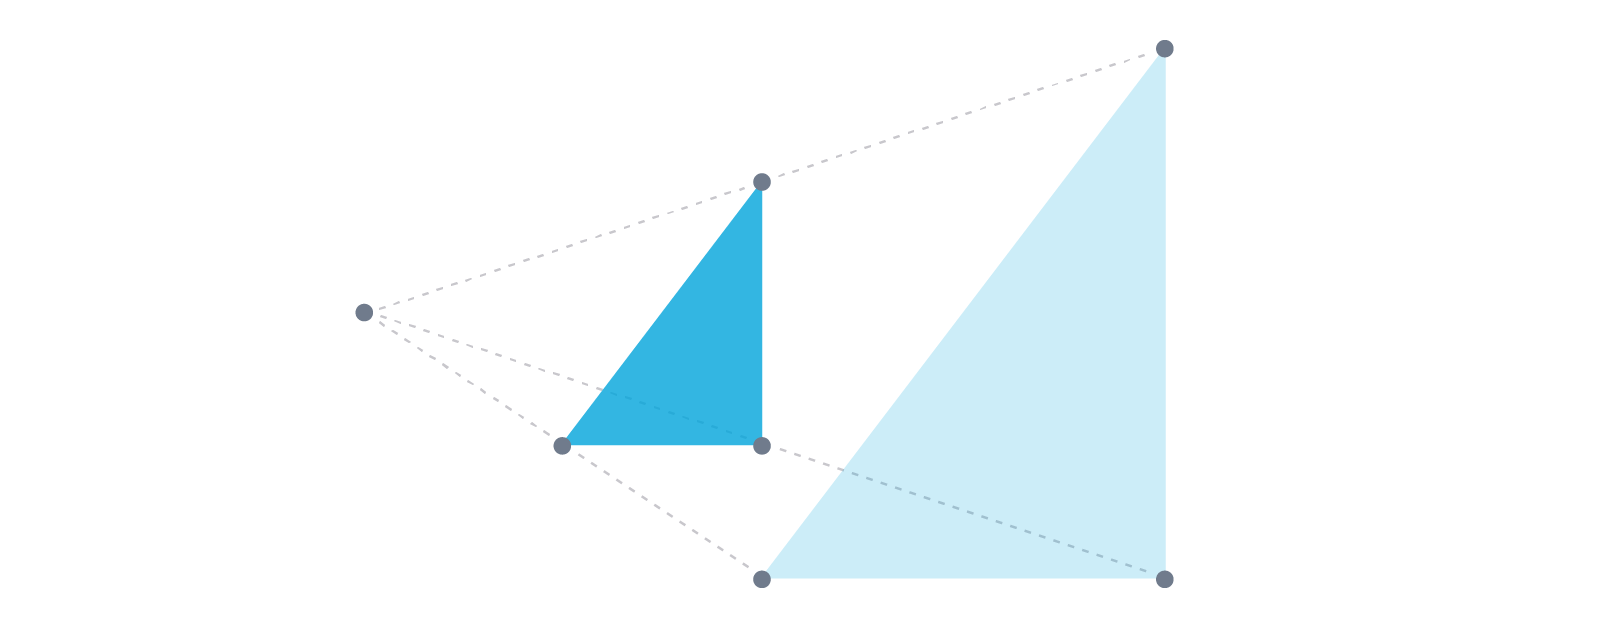 Illustration of two triangles, one smaller than the other.